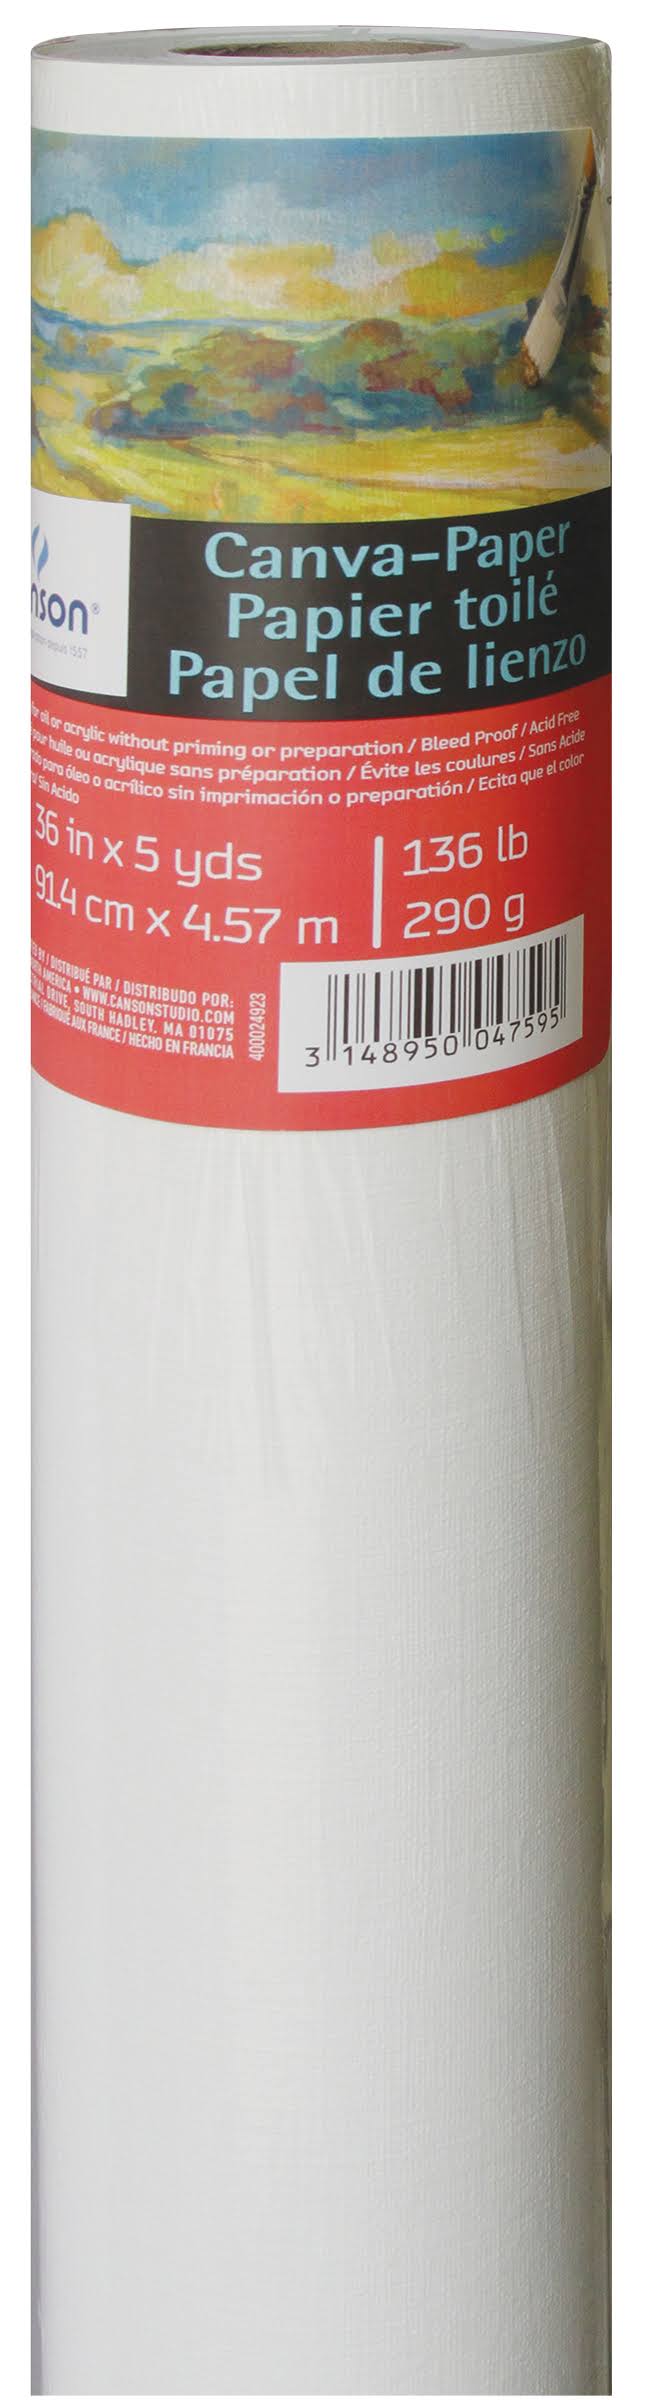 Canson Foundation Canva Paper Rolls - 36" x 5yd